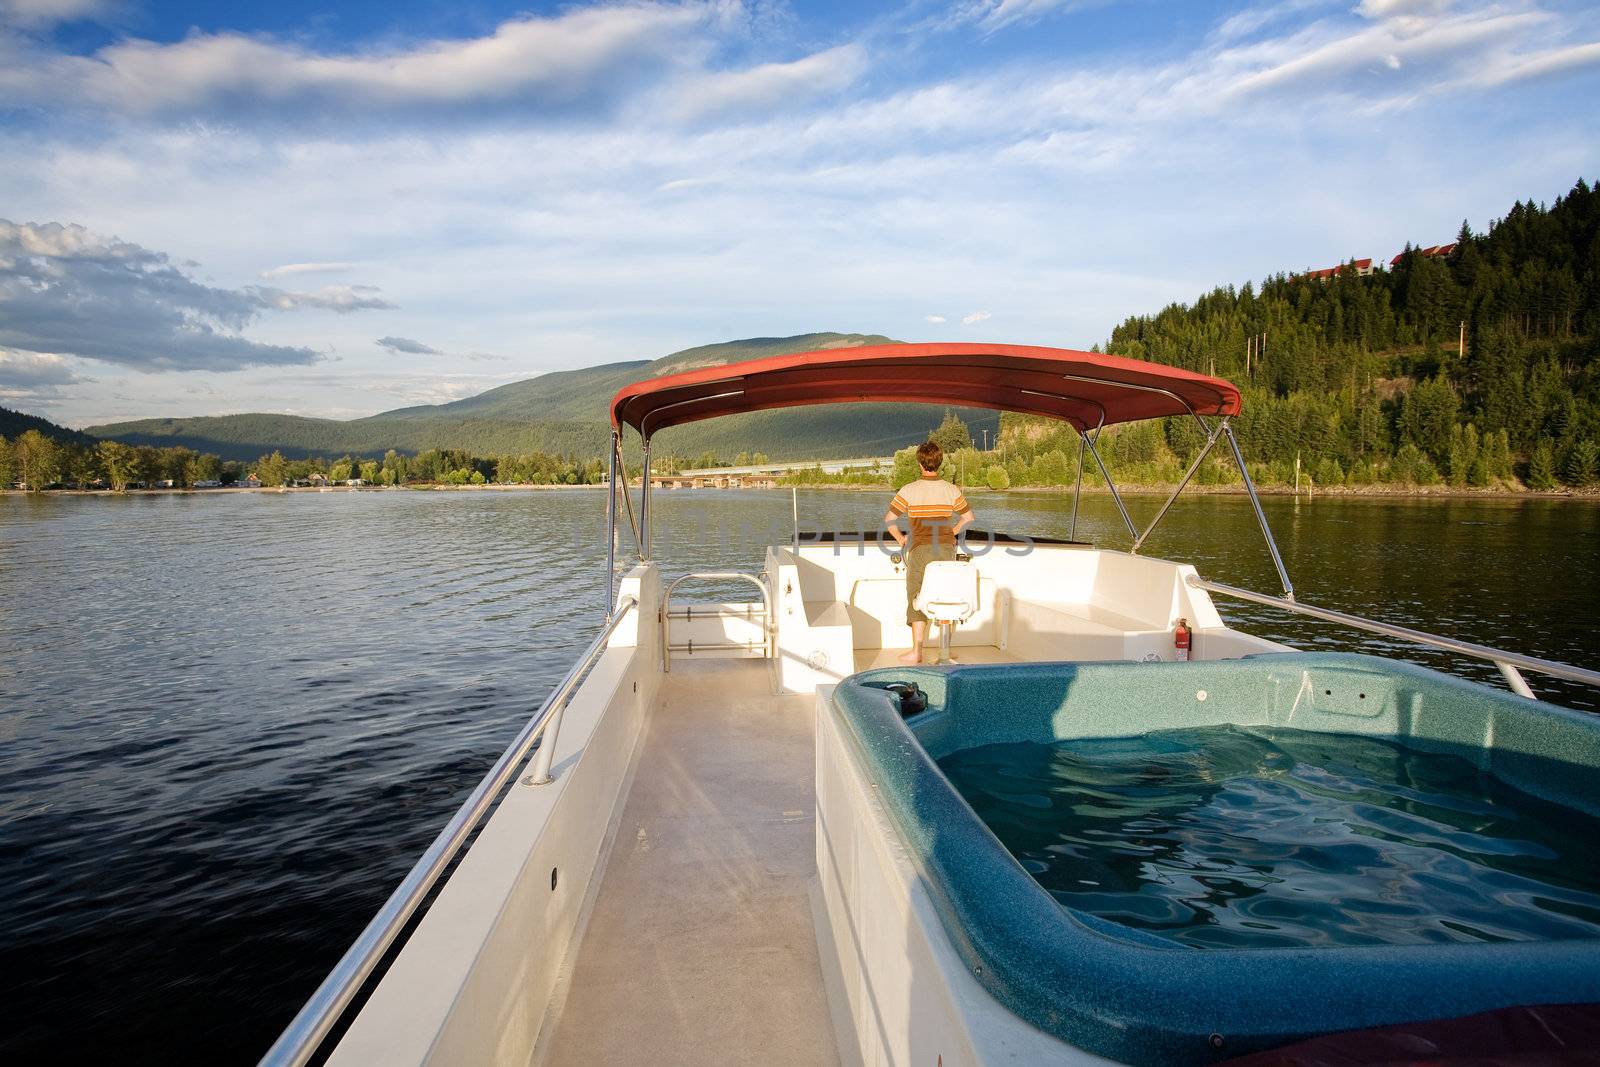 A hot tub on a luxury boat on a lake at sundown